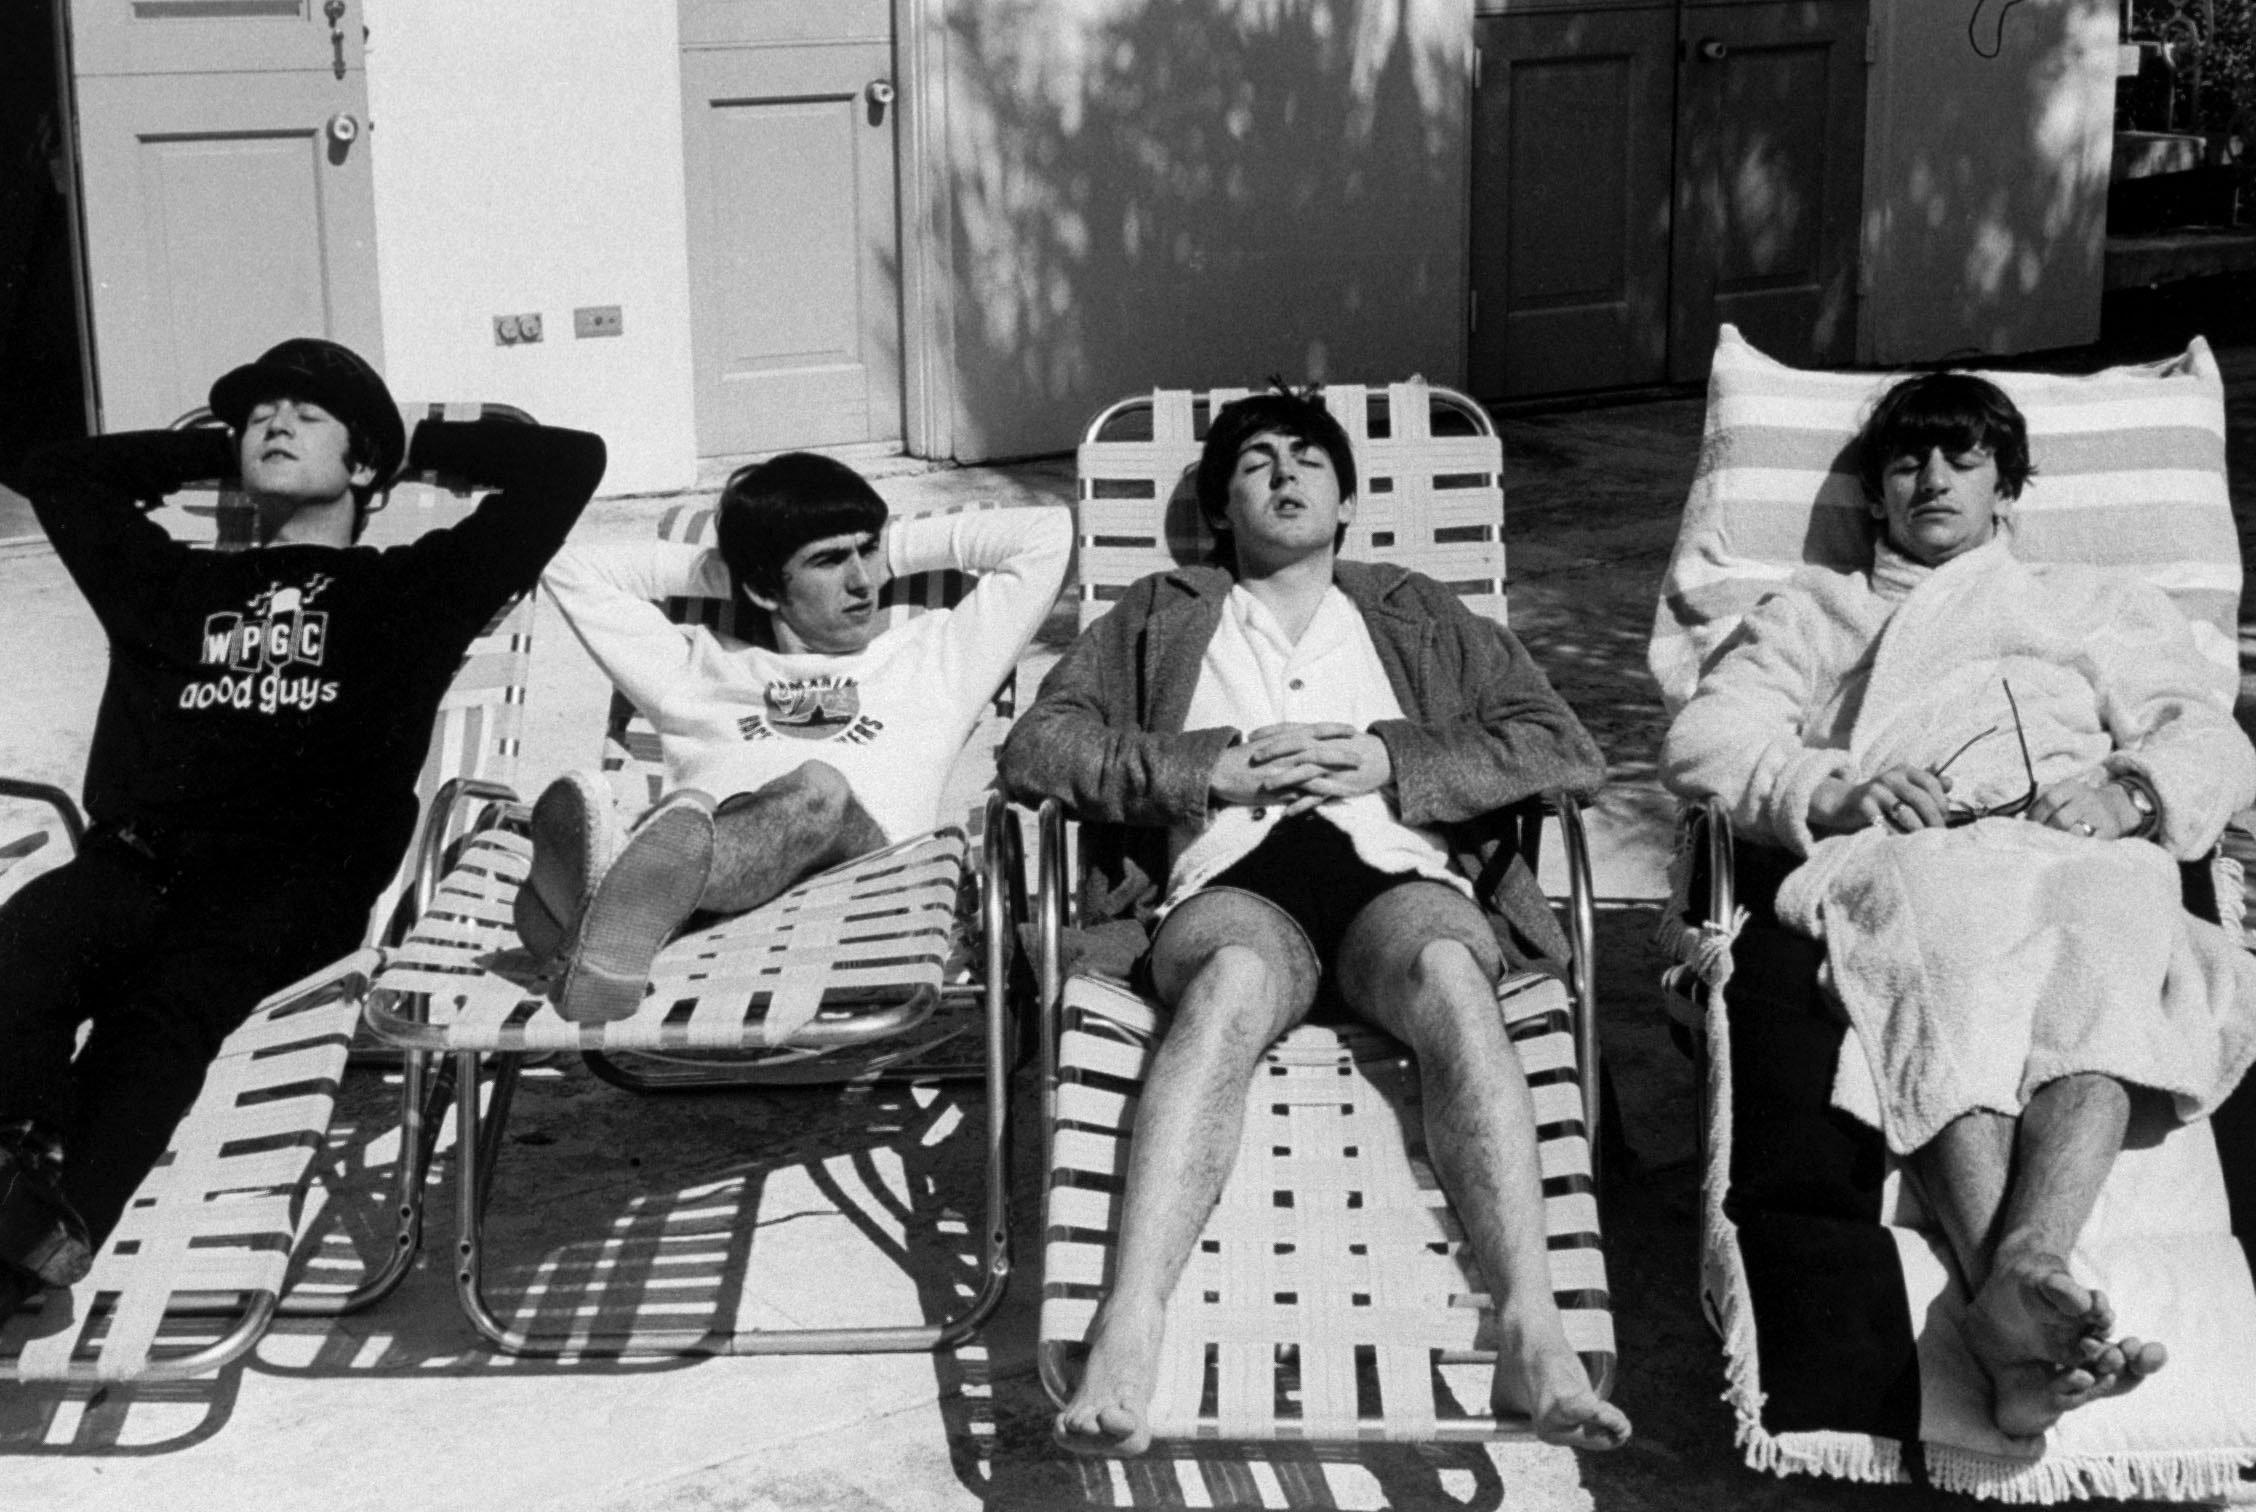 (L-R) John Lennon, George Harrison, Paul McCartney & Ringo Starr, members of British rock group, The Beatles, relaxing on lounge chairs at poolside of the Deauville Hotel. (Photo by Bob Gomel/The LIFE Images Collection/Getty Images)